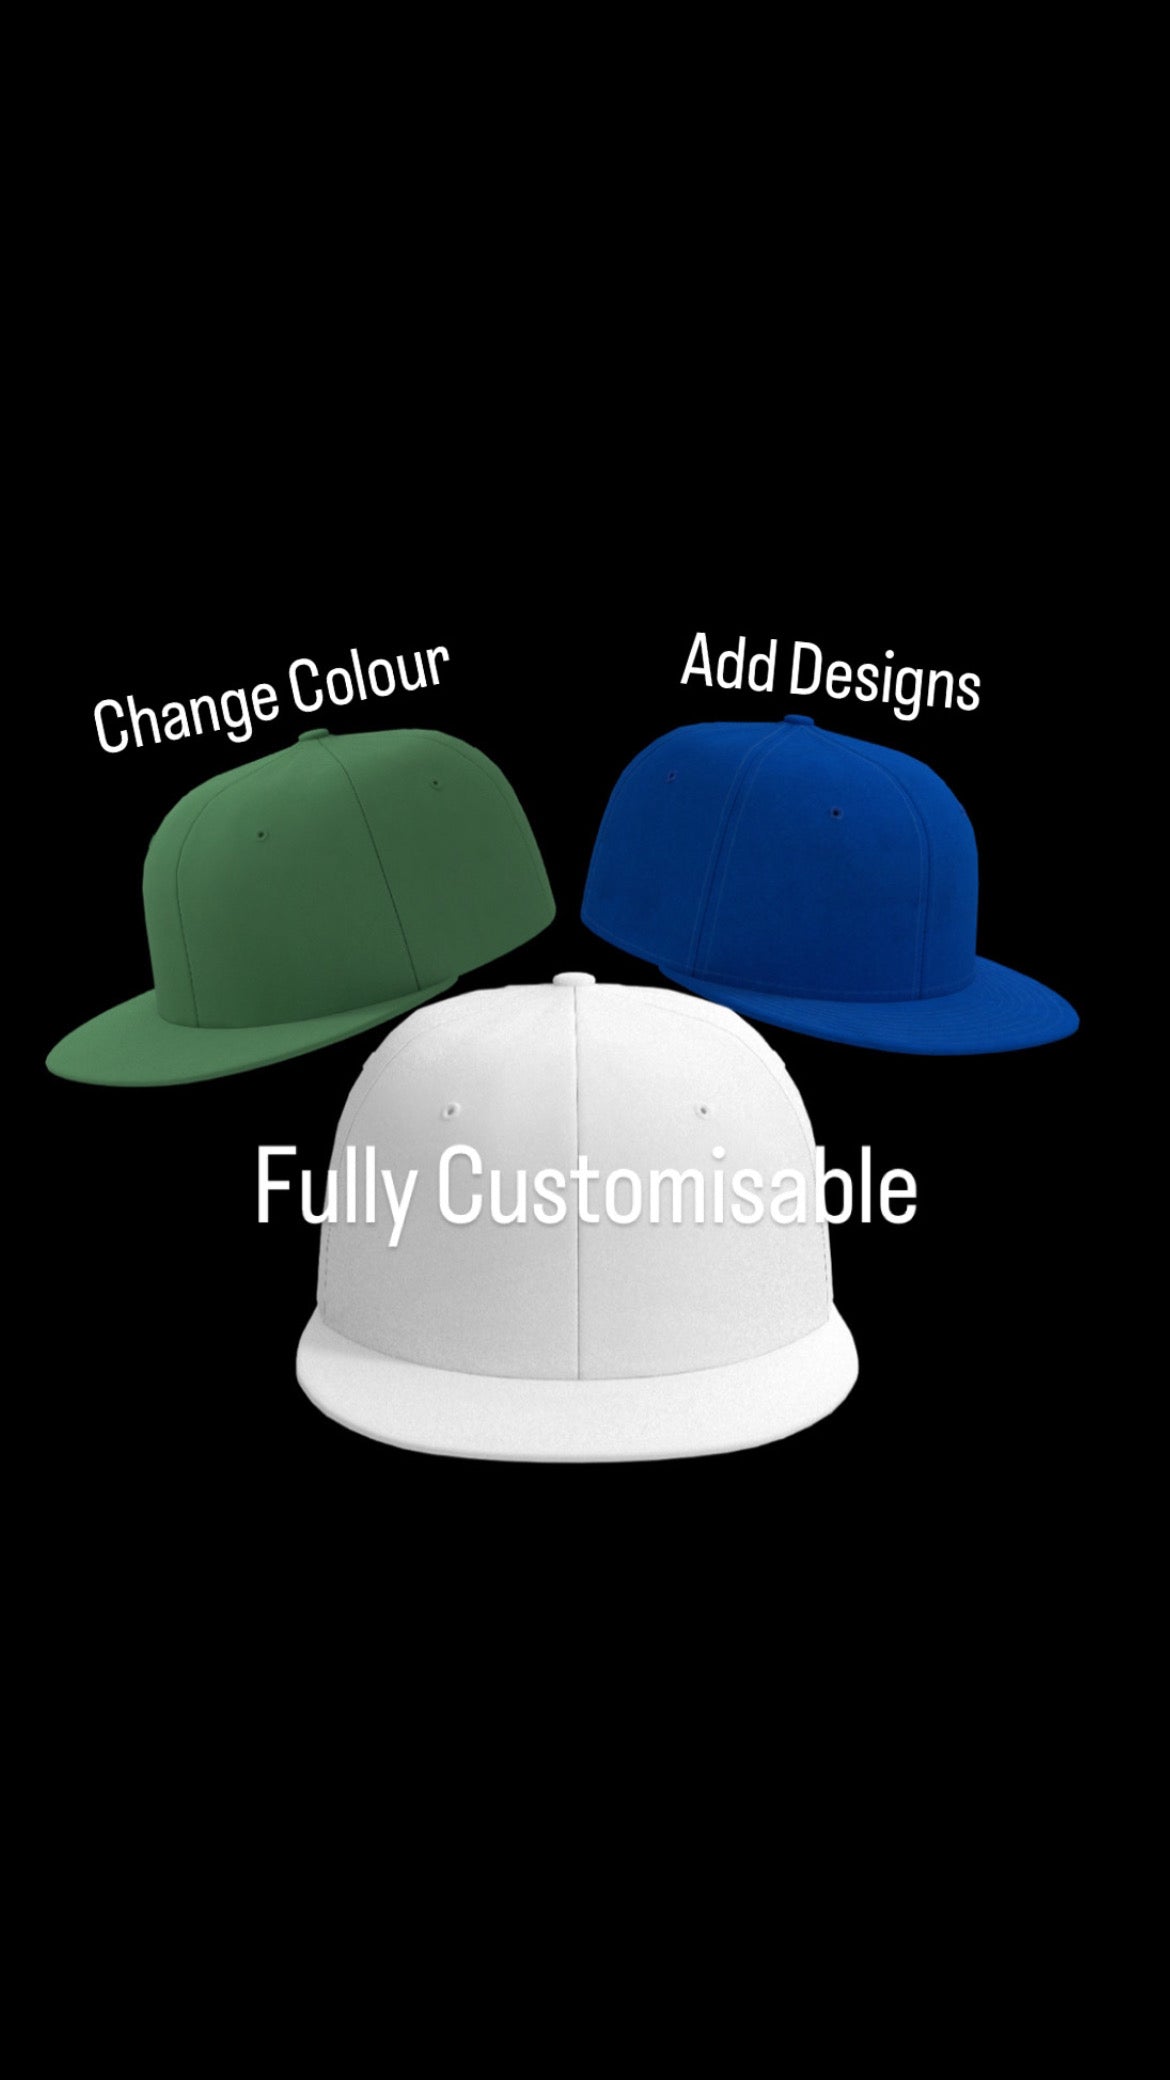 𝐆𝖊𝖊𝐭🦋  Custom fitted hats, Fitted hats, Swag hats